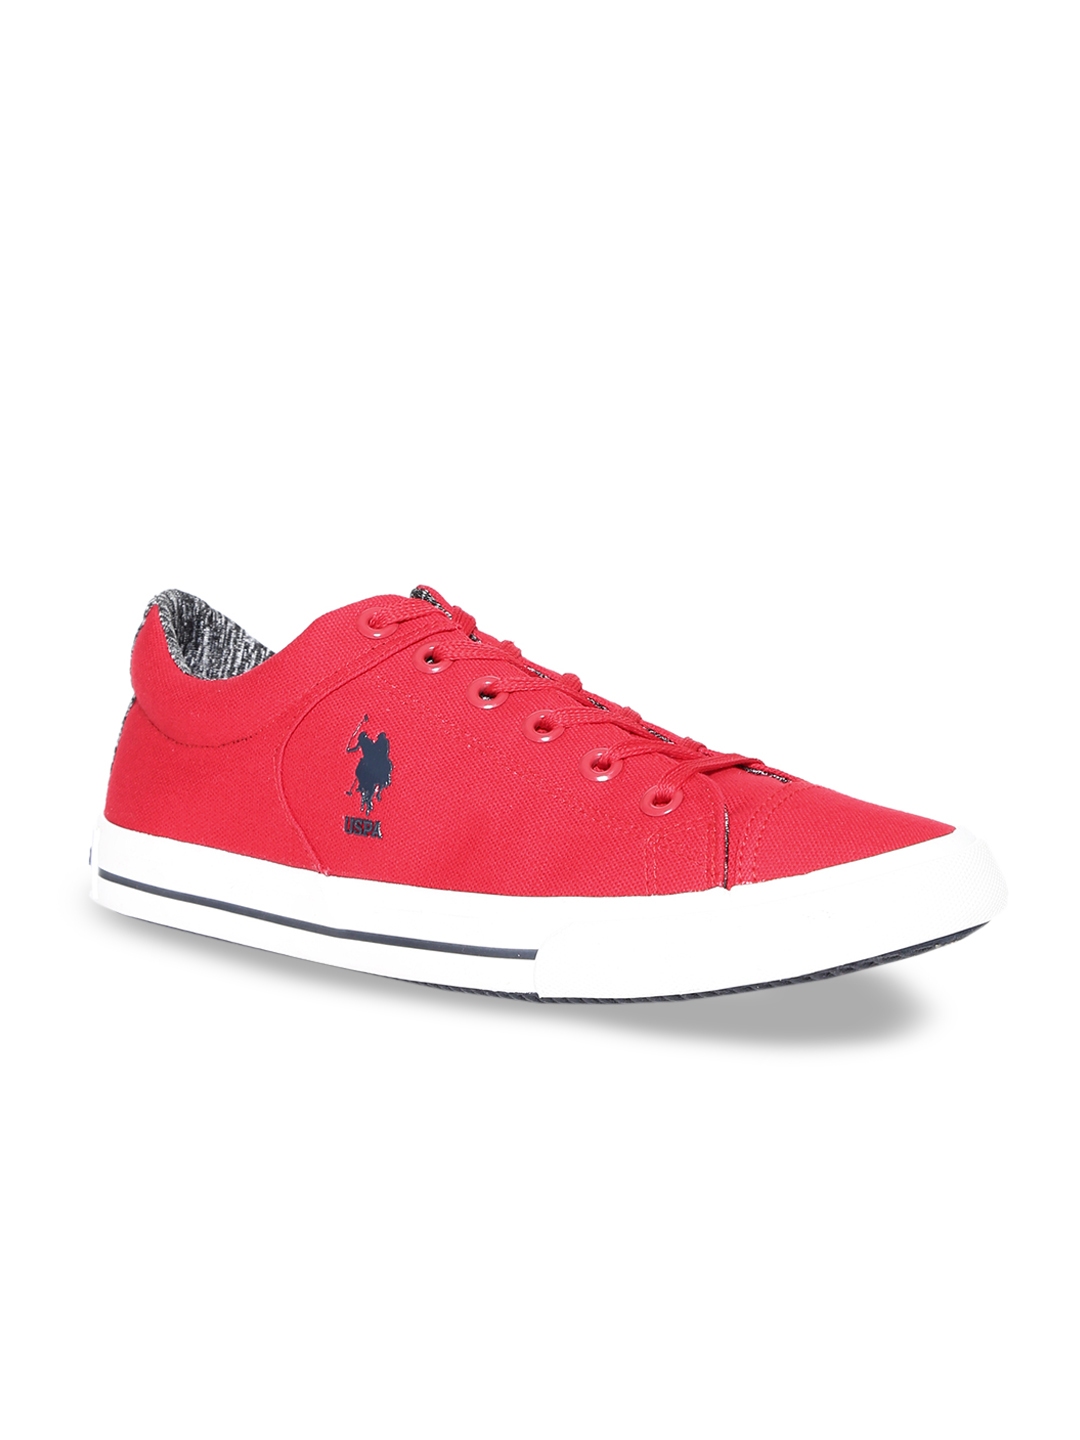 Buy U.S. Polo Assn. Men Red Sneakers - Casual Shoes for Men 10863112 ...